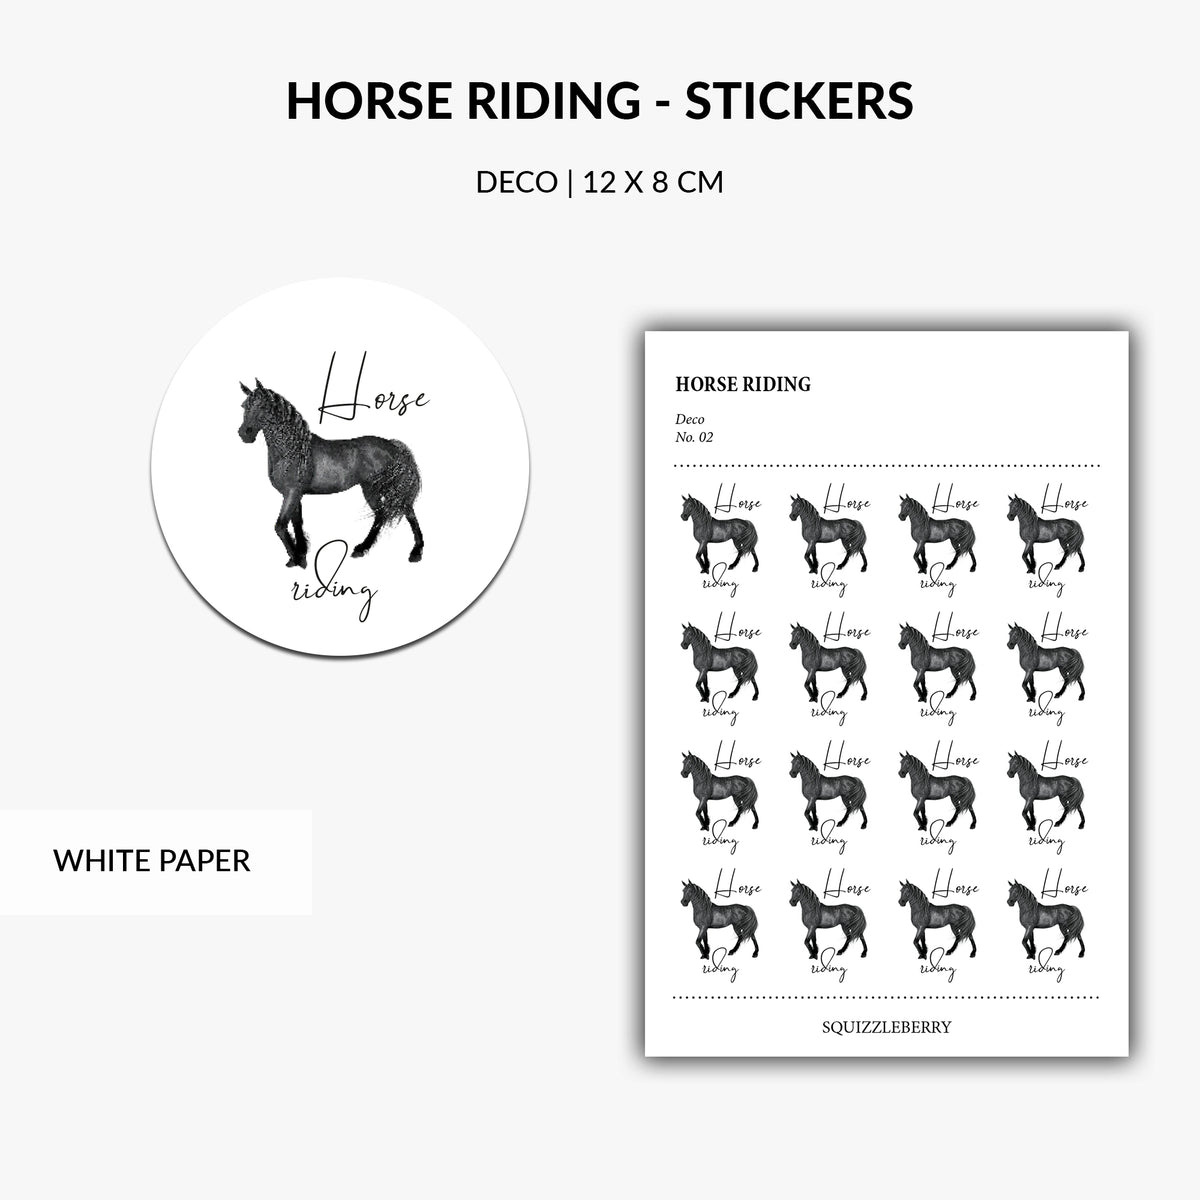 horse riding stickers by Squizzleberry